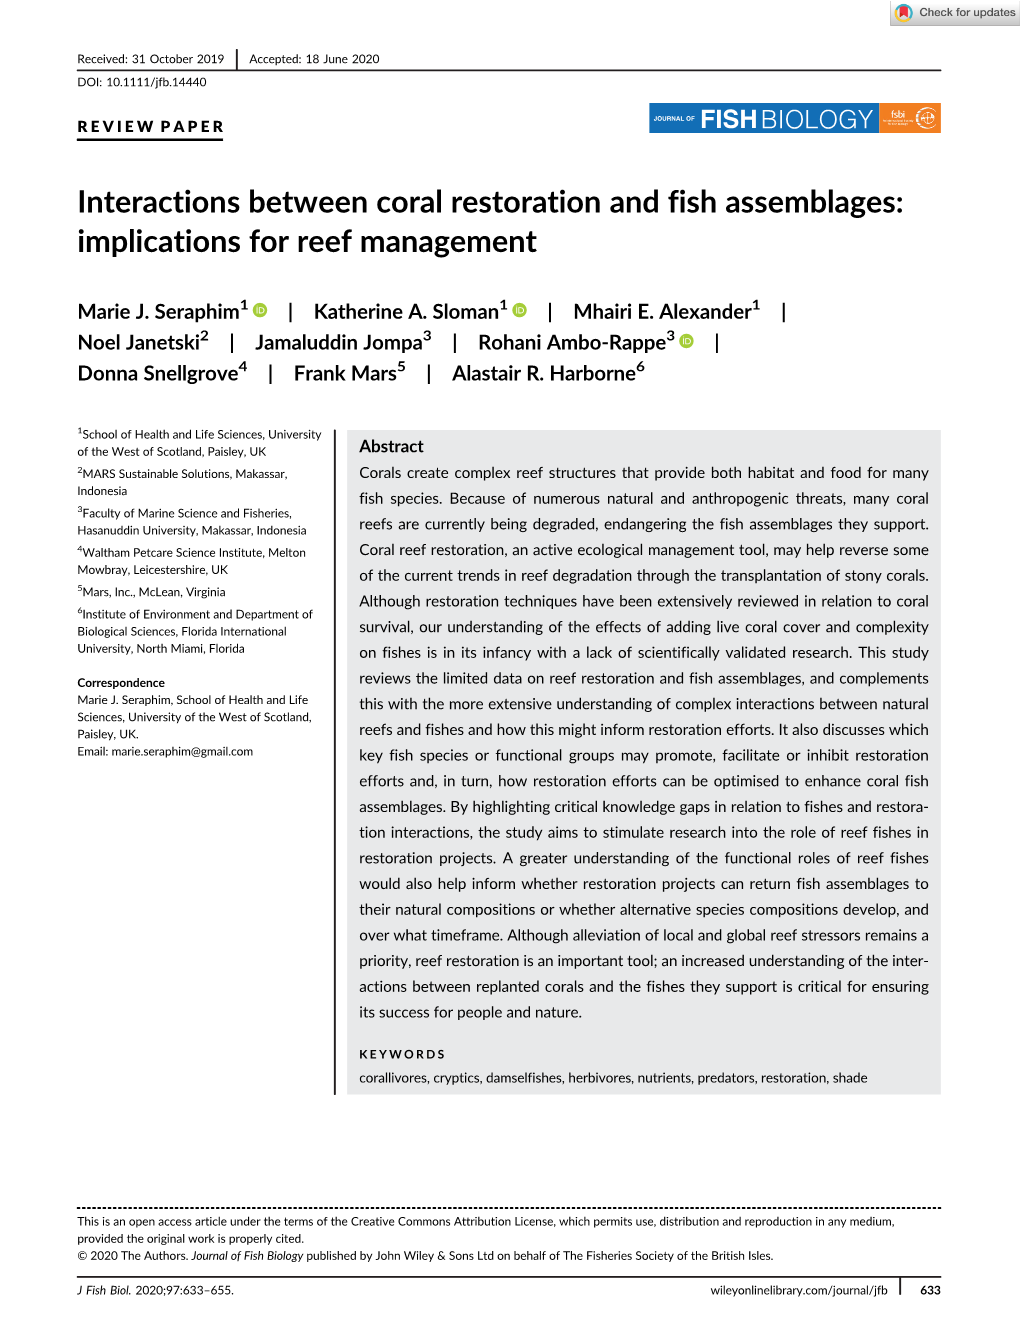 Interactions Between Coral Restoration and Fish Assemblages: Implications for Reef Management